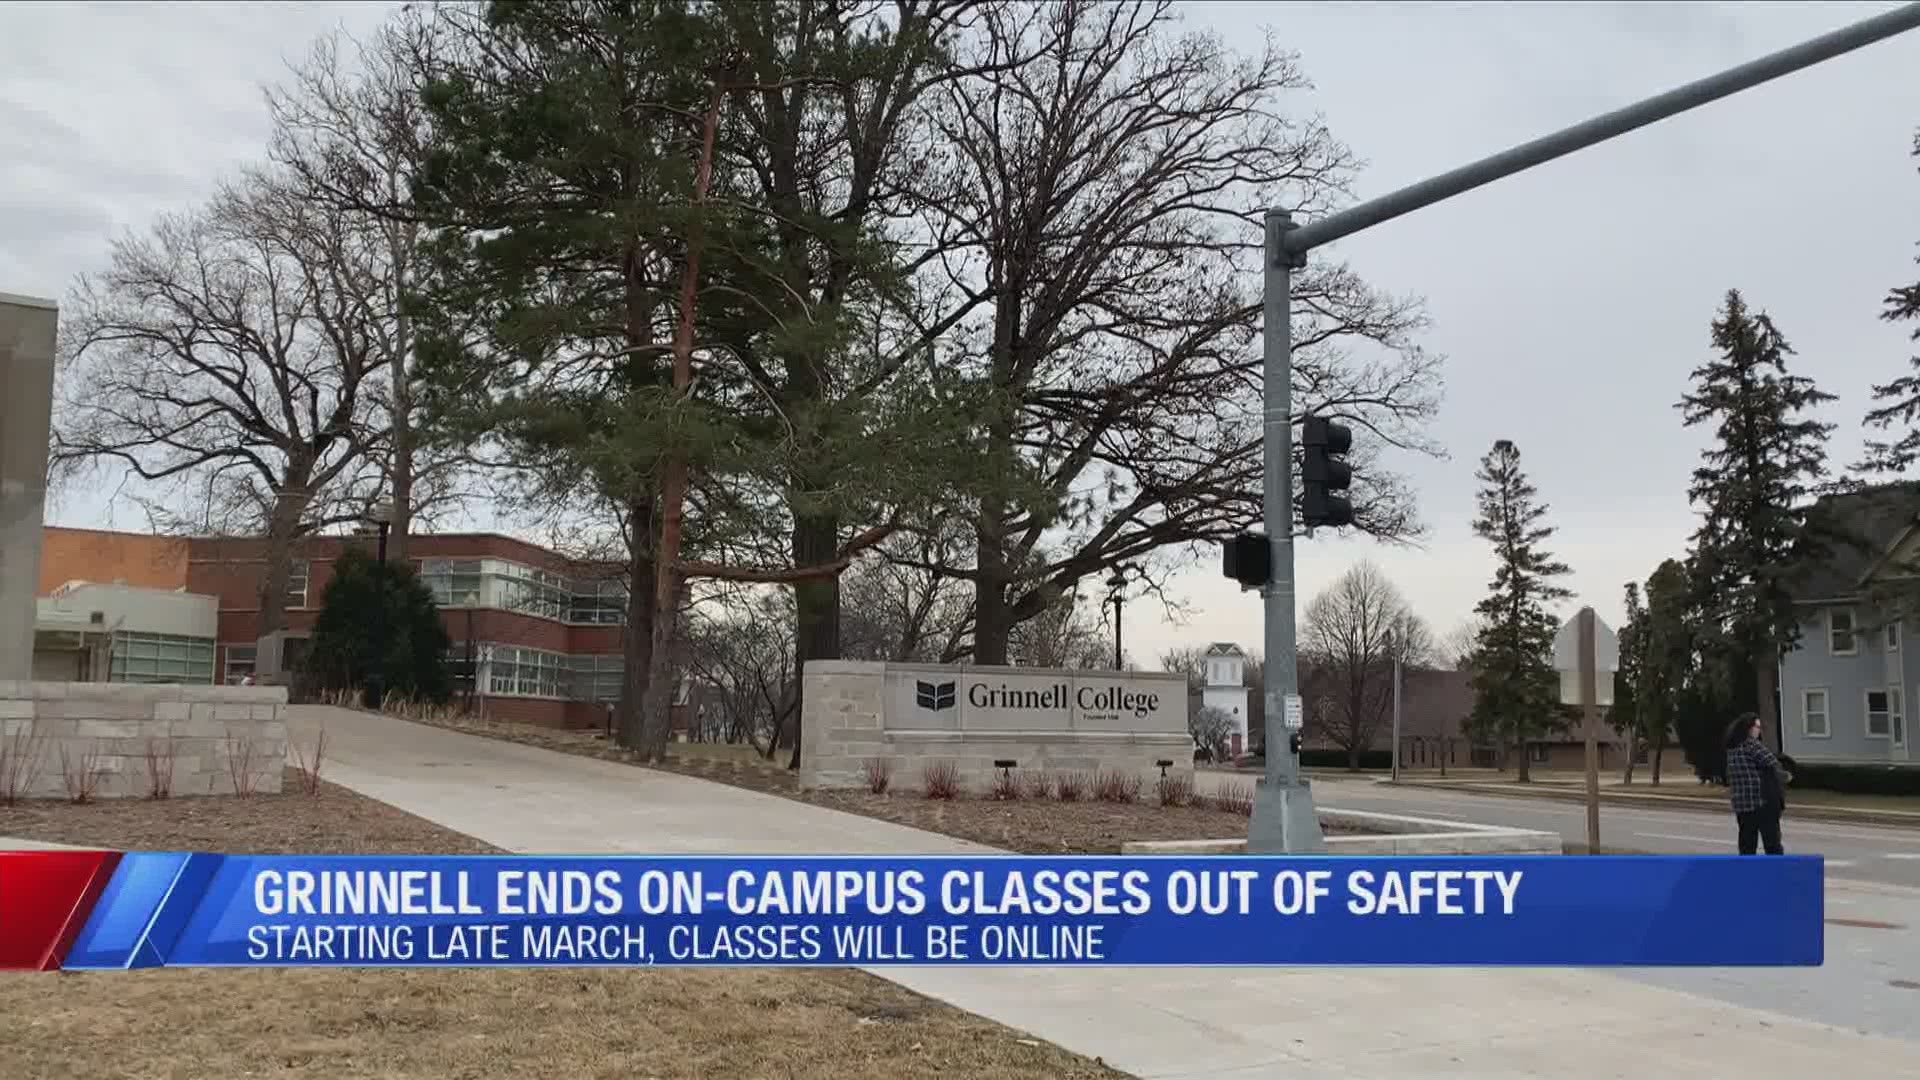 Grinnell College telling students to leave campus due to COVID-19 concerns